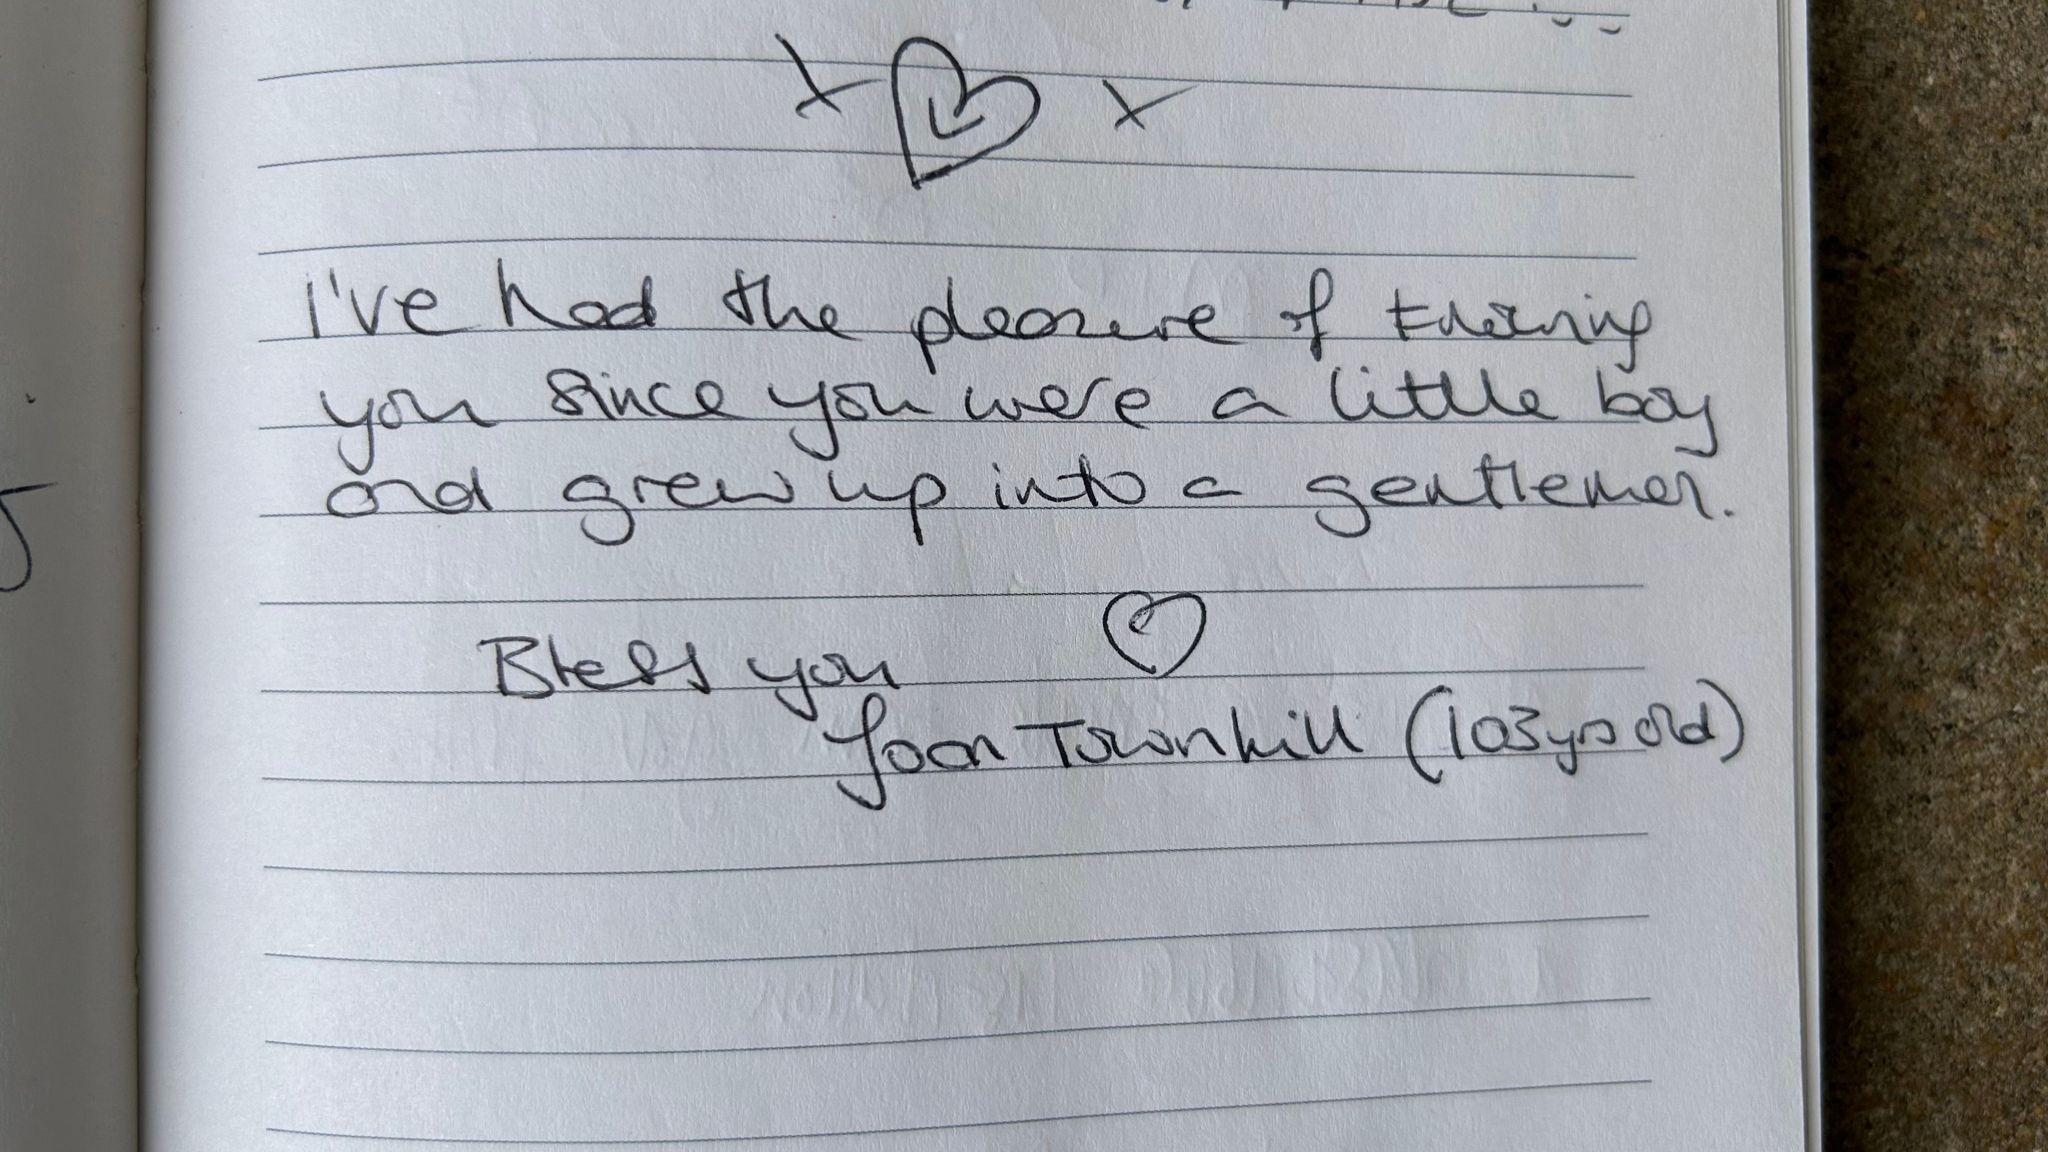 Note left in book at funeral service